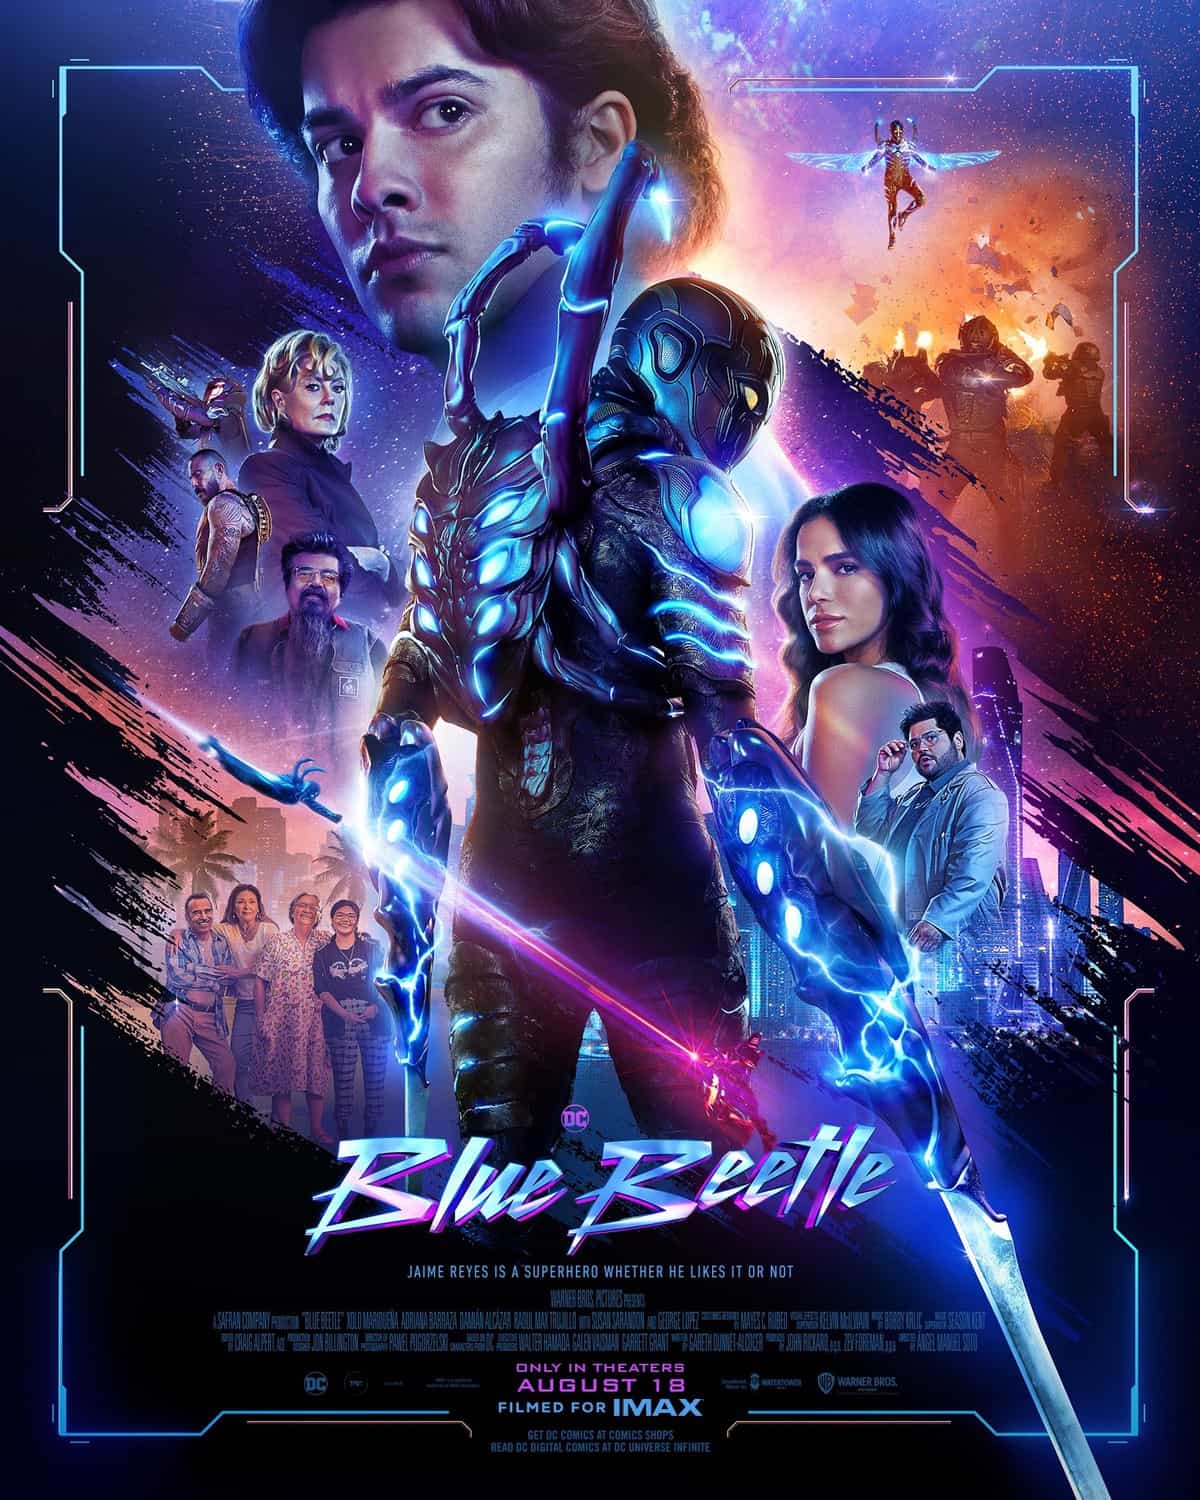 New poster has been released for Blue Beetle which stars Xolo Mariduena and Bruna Marquezine - movie UK release date 18th August 2023 #bluebeetle